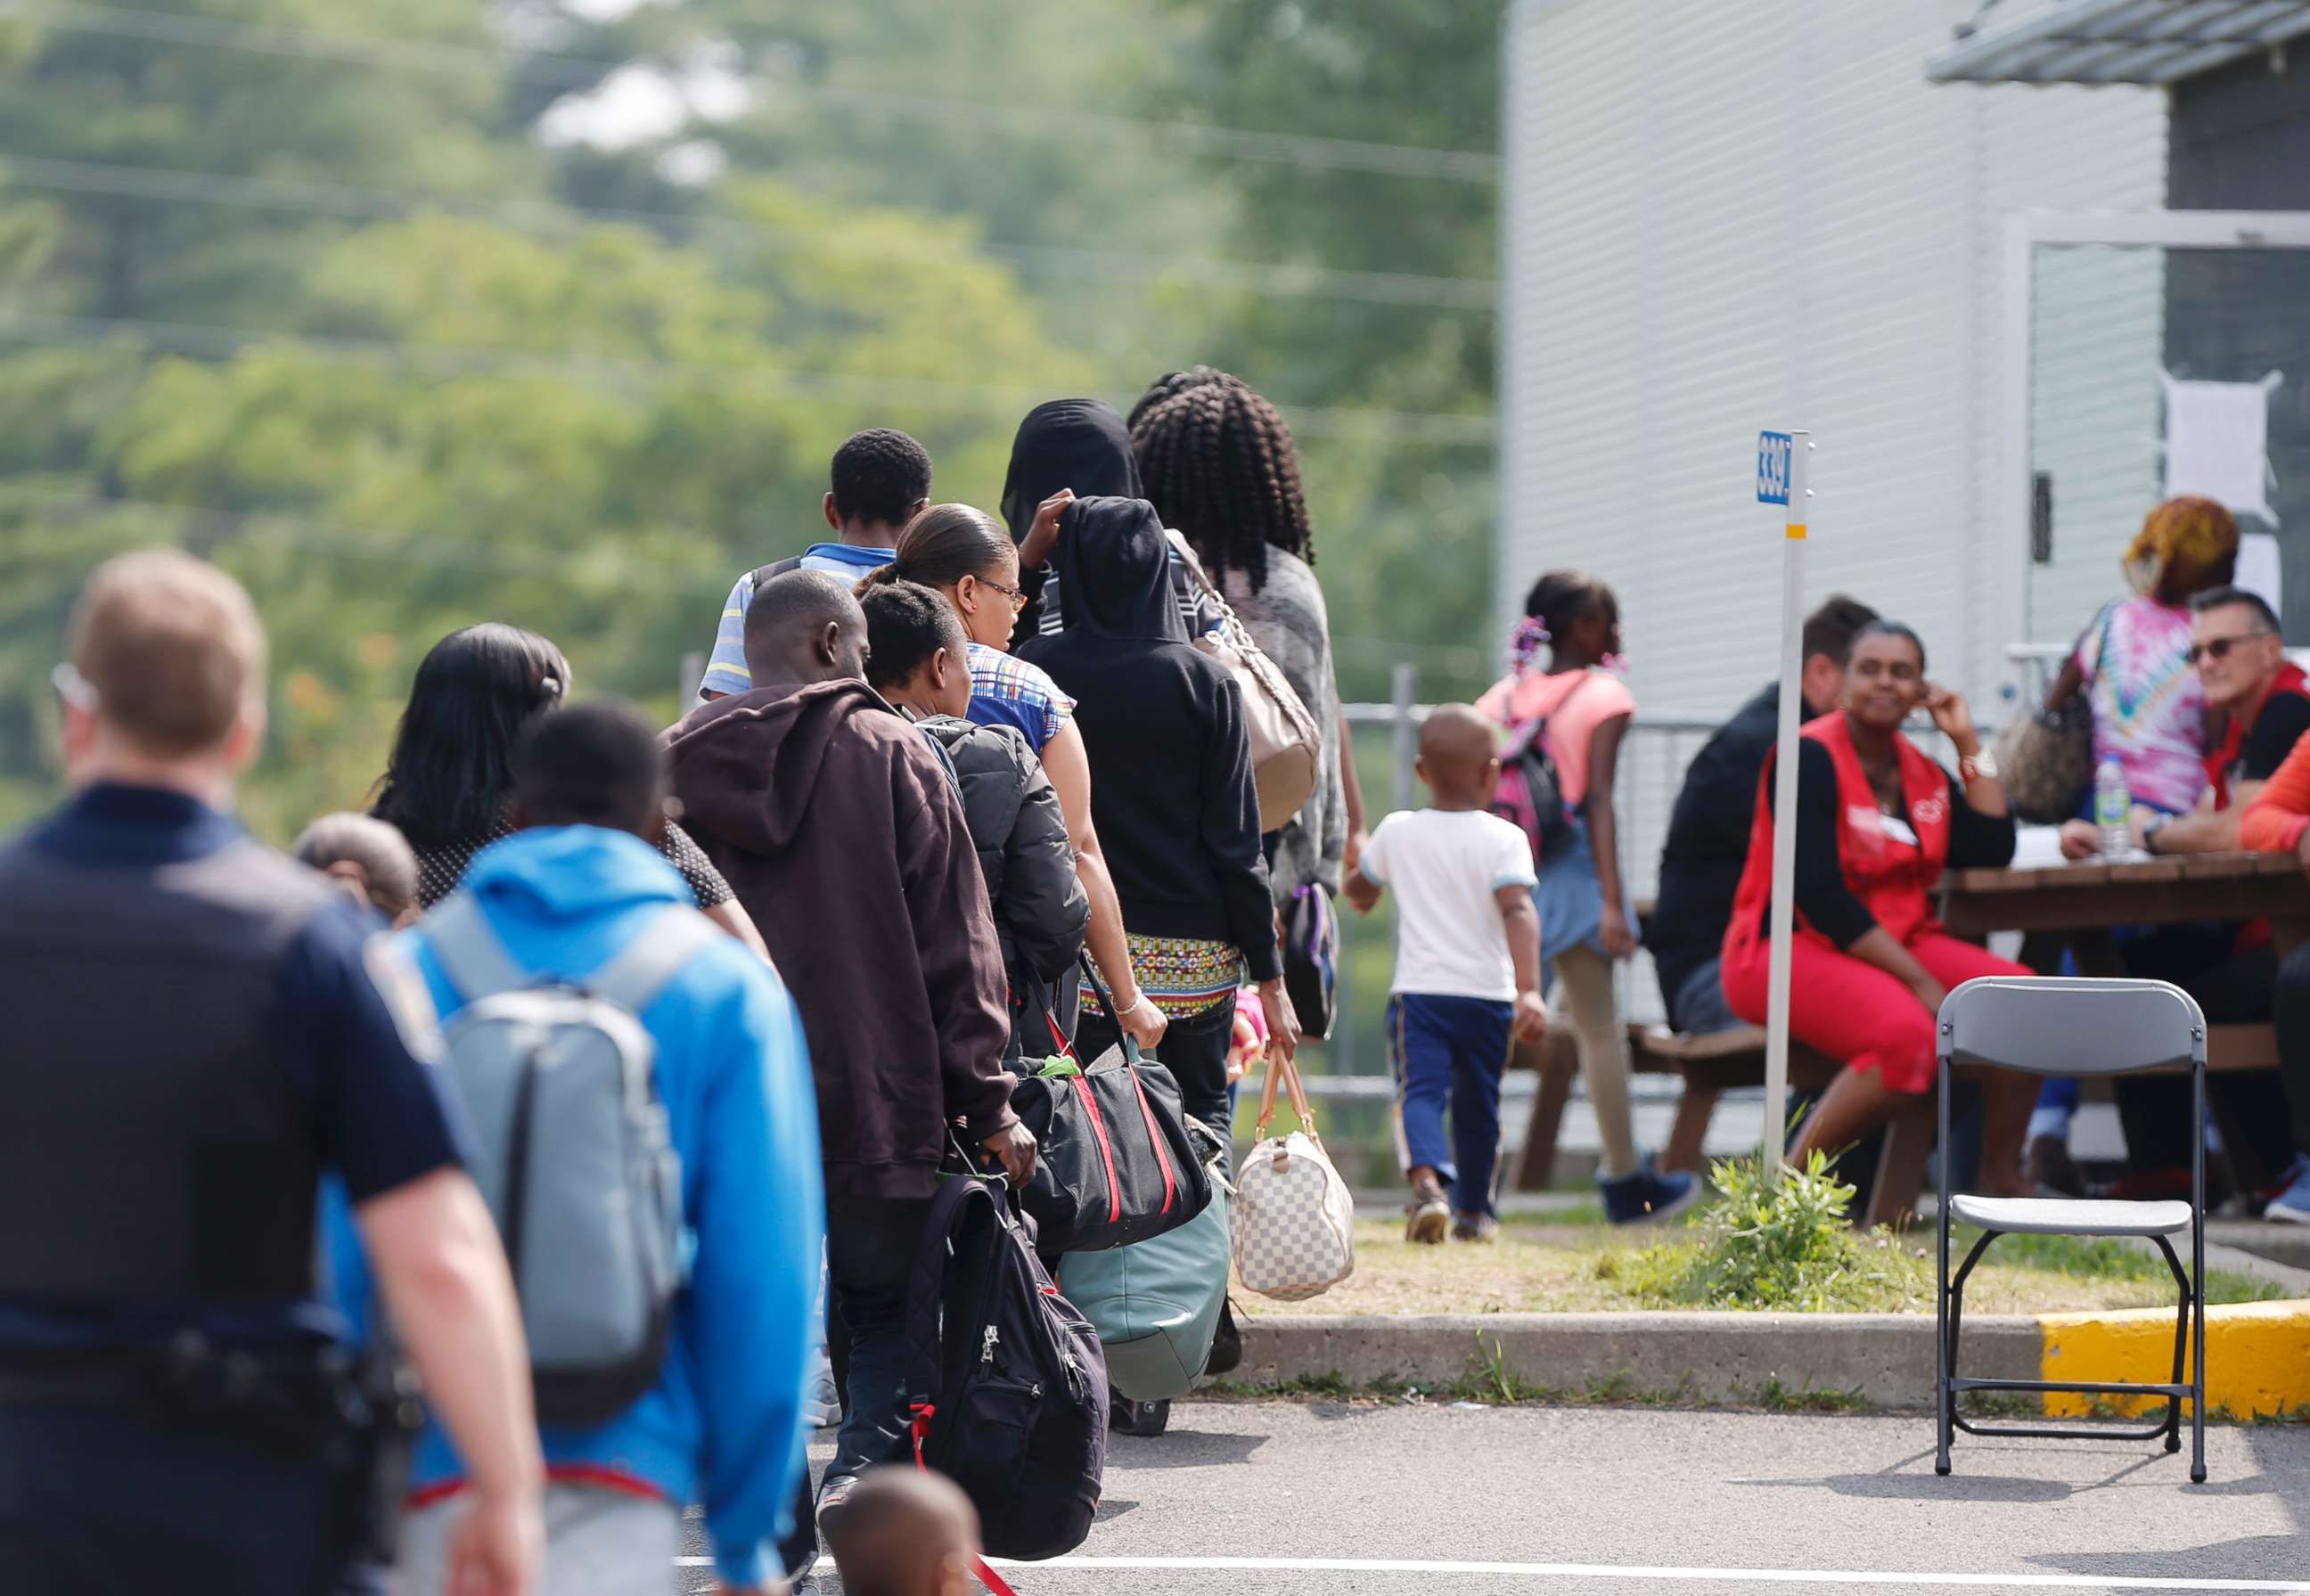 PHOTO: A group of asylum seekers wait to be processed after being escorted from their tent encampment to the Canada Border Services in Lacolle, Quebec, on Aug. 11, 2017.